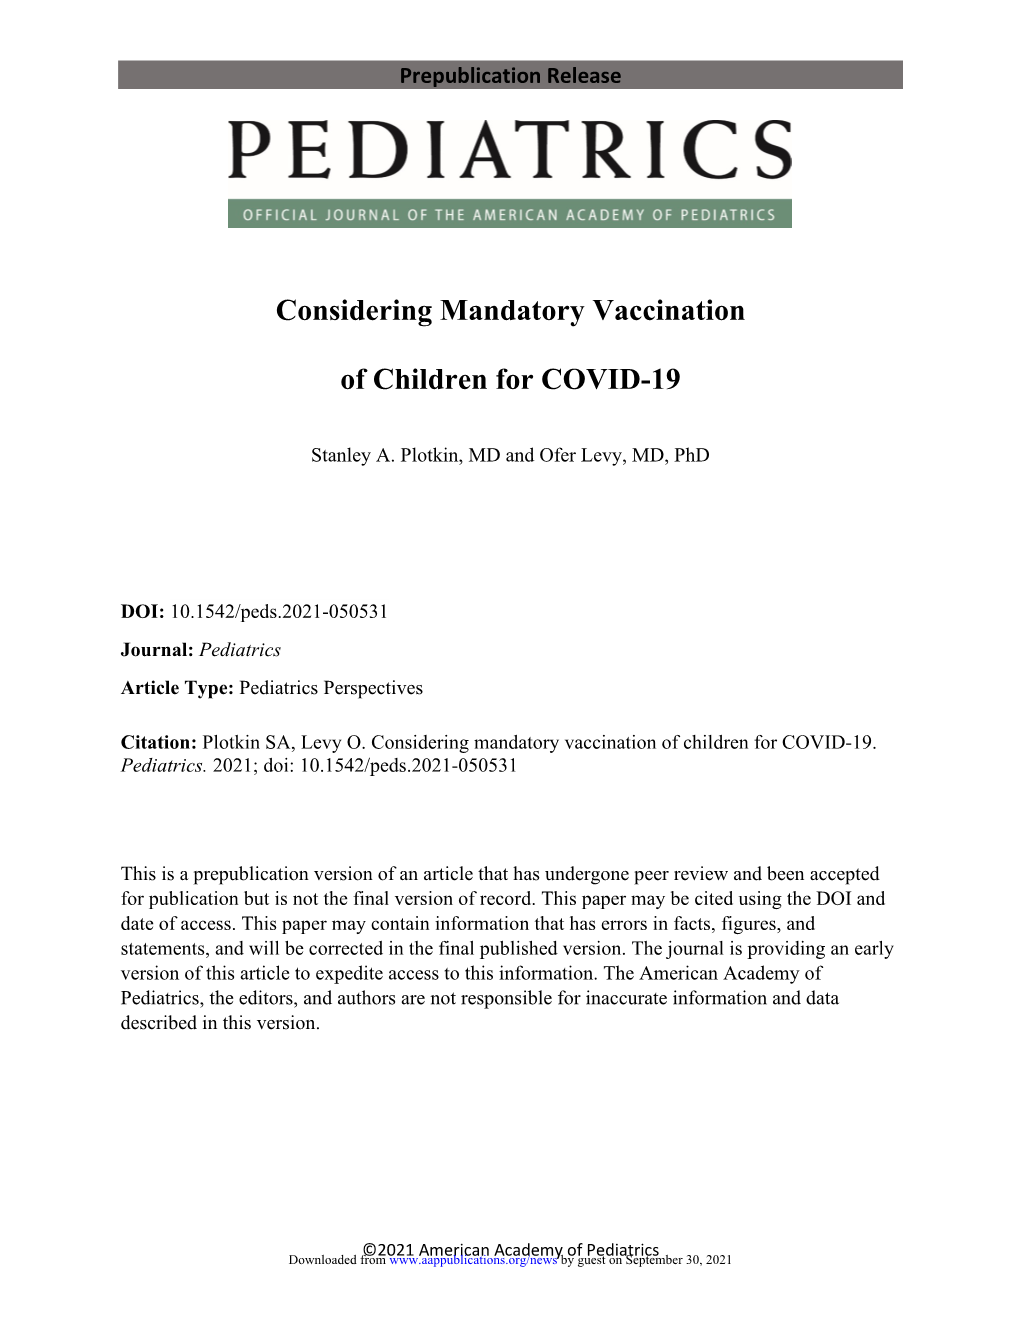 Considering Mandatory Vaccination of Children for COVID-19